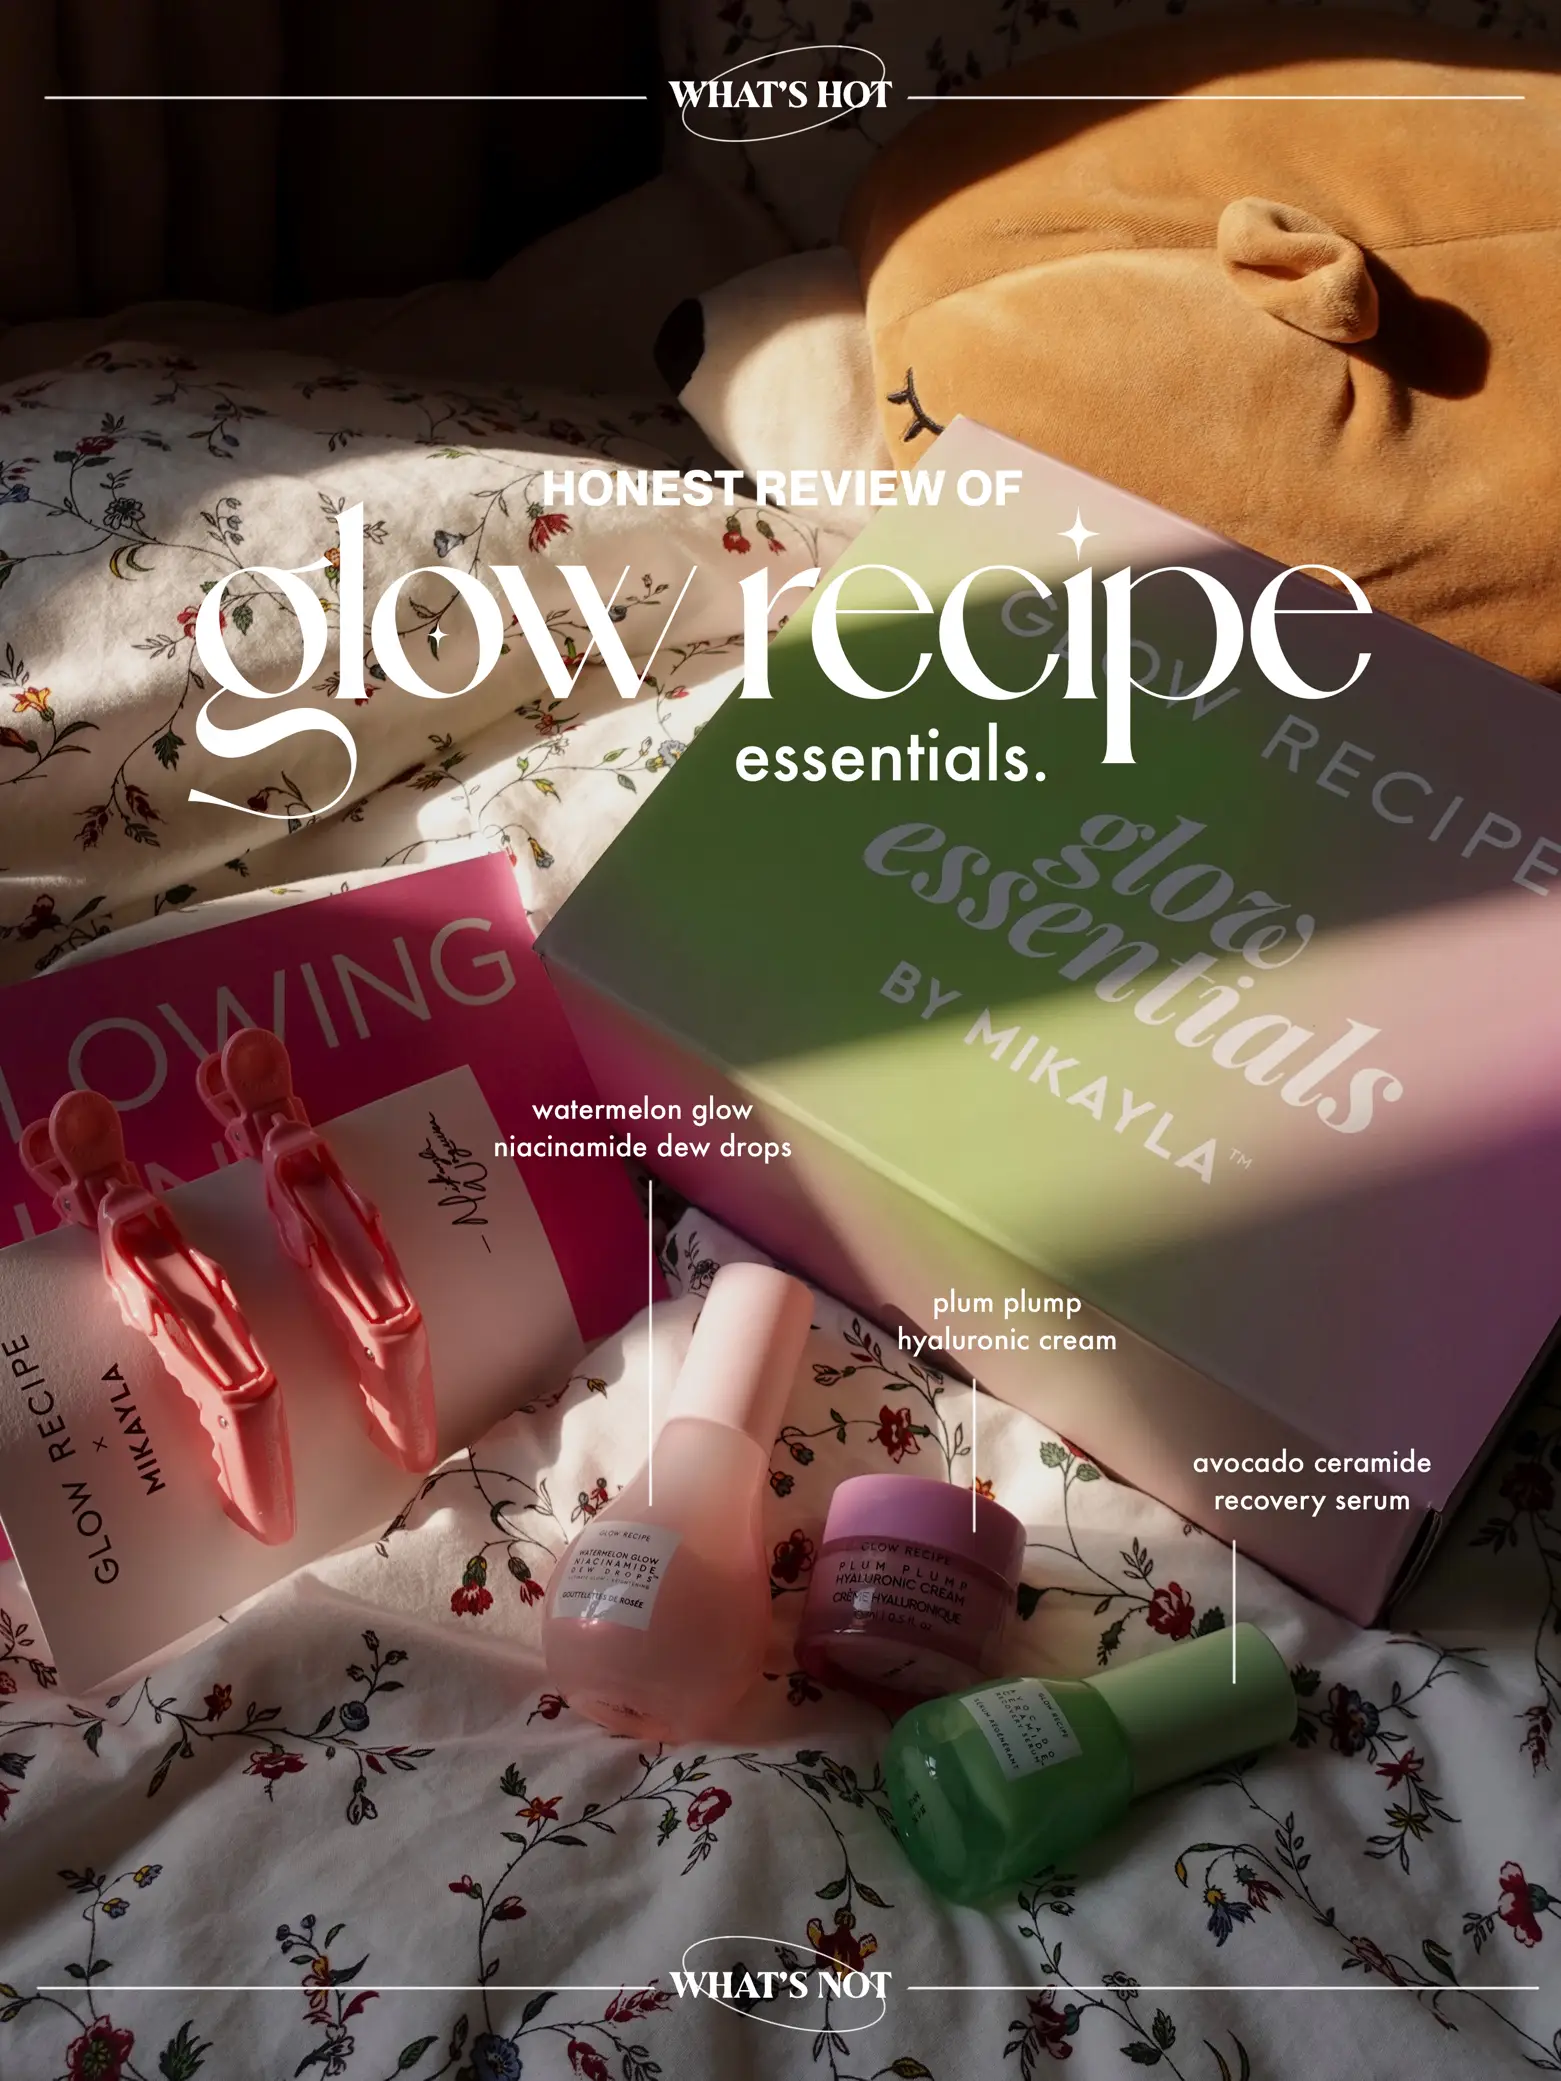 Glow Recipe 🍉 — what’s REALLY worth your money?'s images(0)